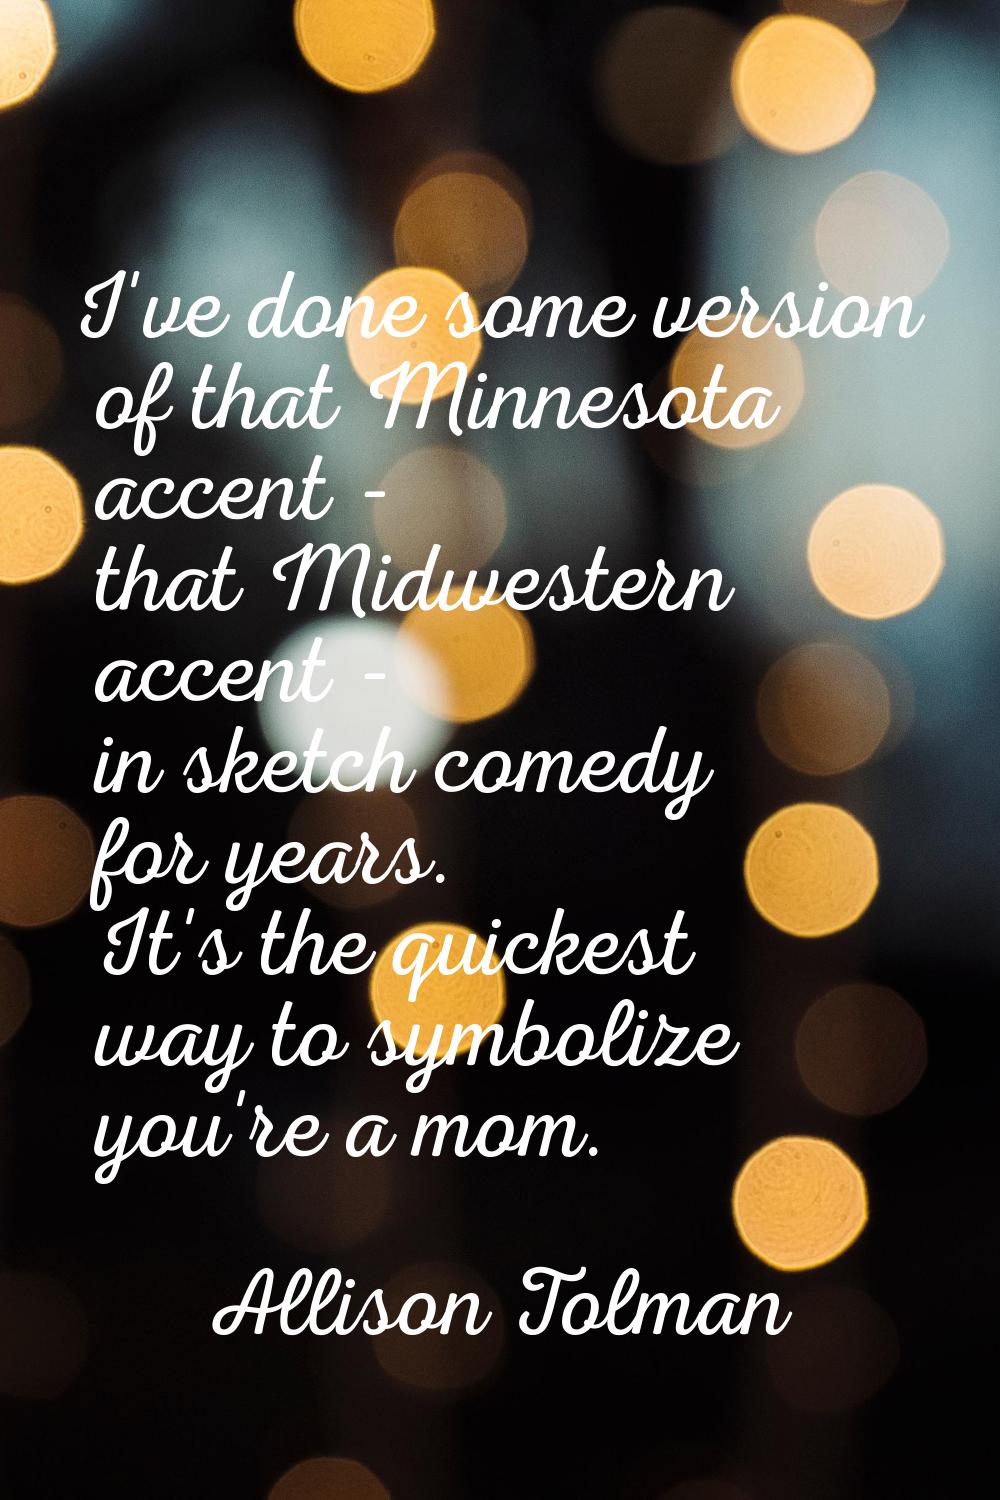 I've done some version of that Minnesota accent - that Midwestern accent - in sketch comedy for yea